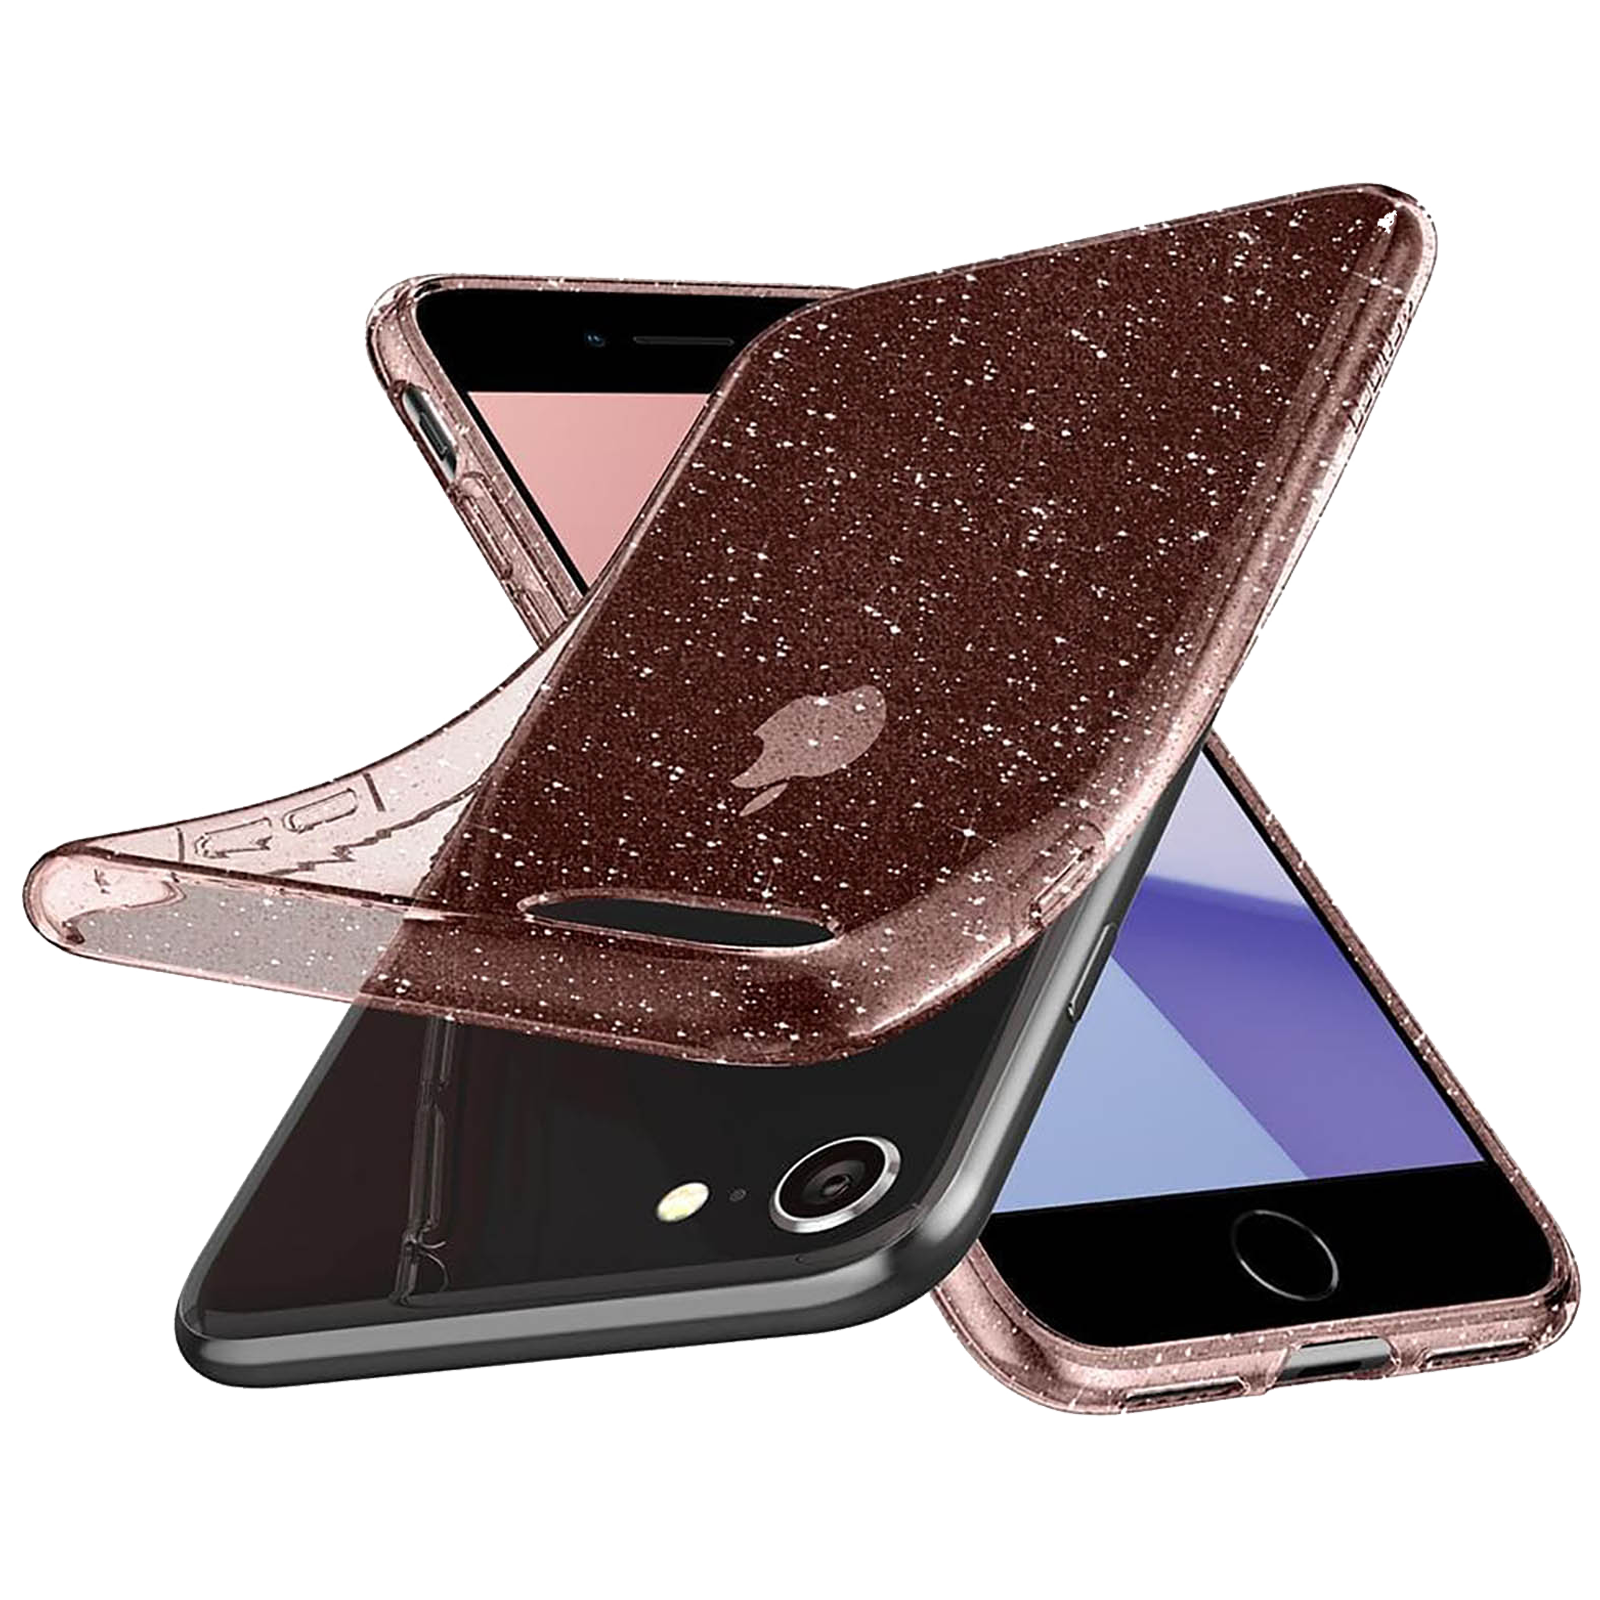 Buy spigen Liquid Crystal Glitter TPU & Polycarbonate Back Cover for Apple  iPhone 7, 8, SE (Wireless Charging Compatible, Crystal Quartz) online at  best prices from Croma. Check product details, reviews 